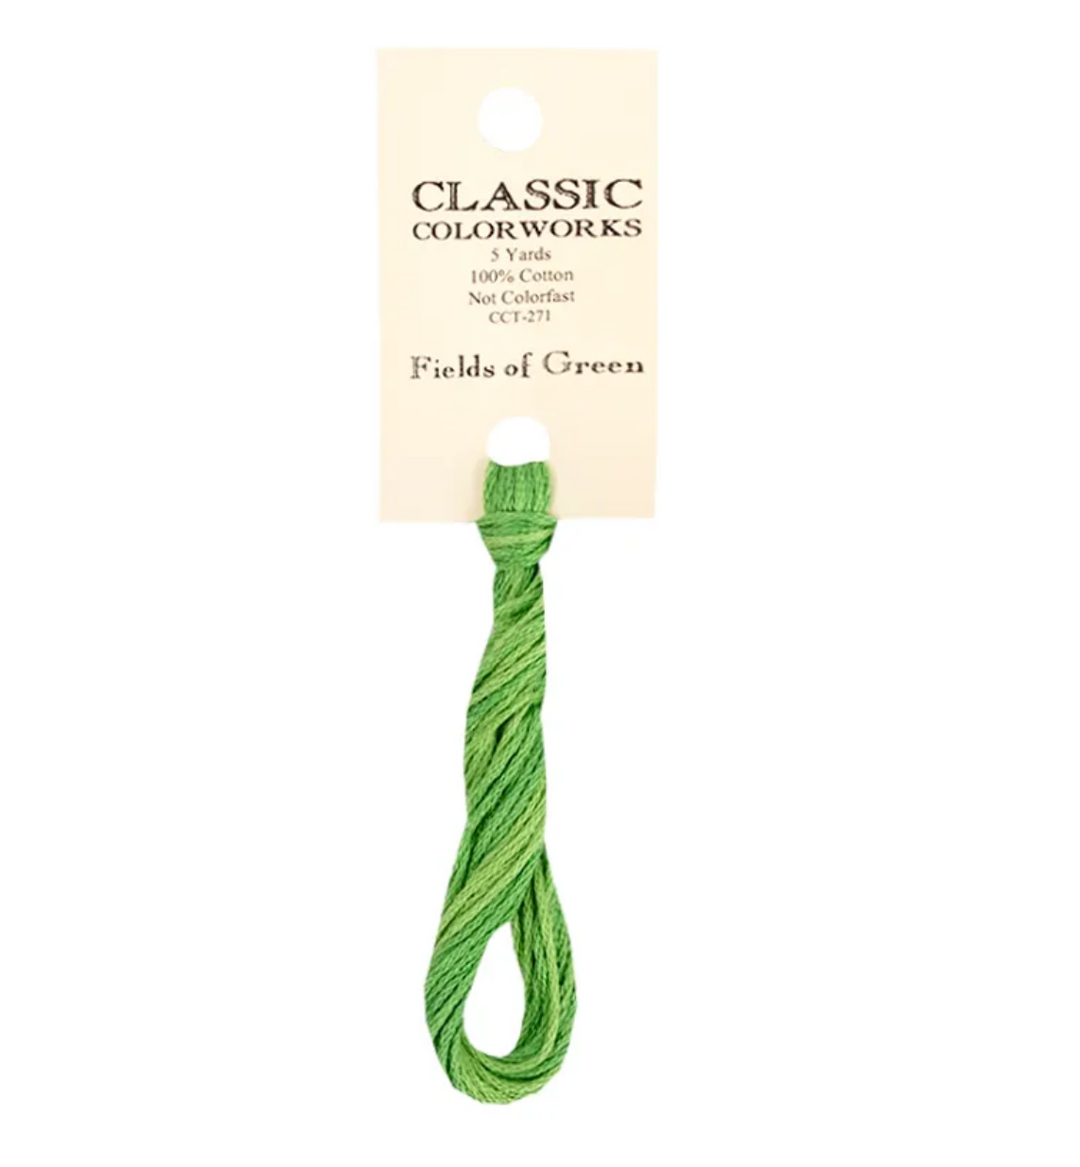 Fields of Green | Classic Colorworks - Hand-Dyed Embroidery Floss